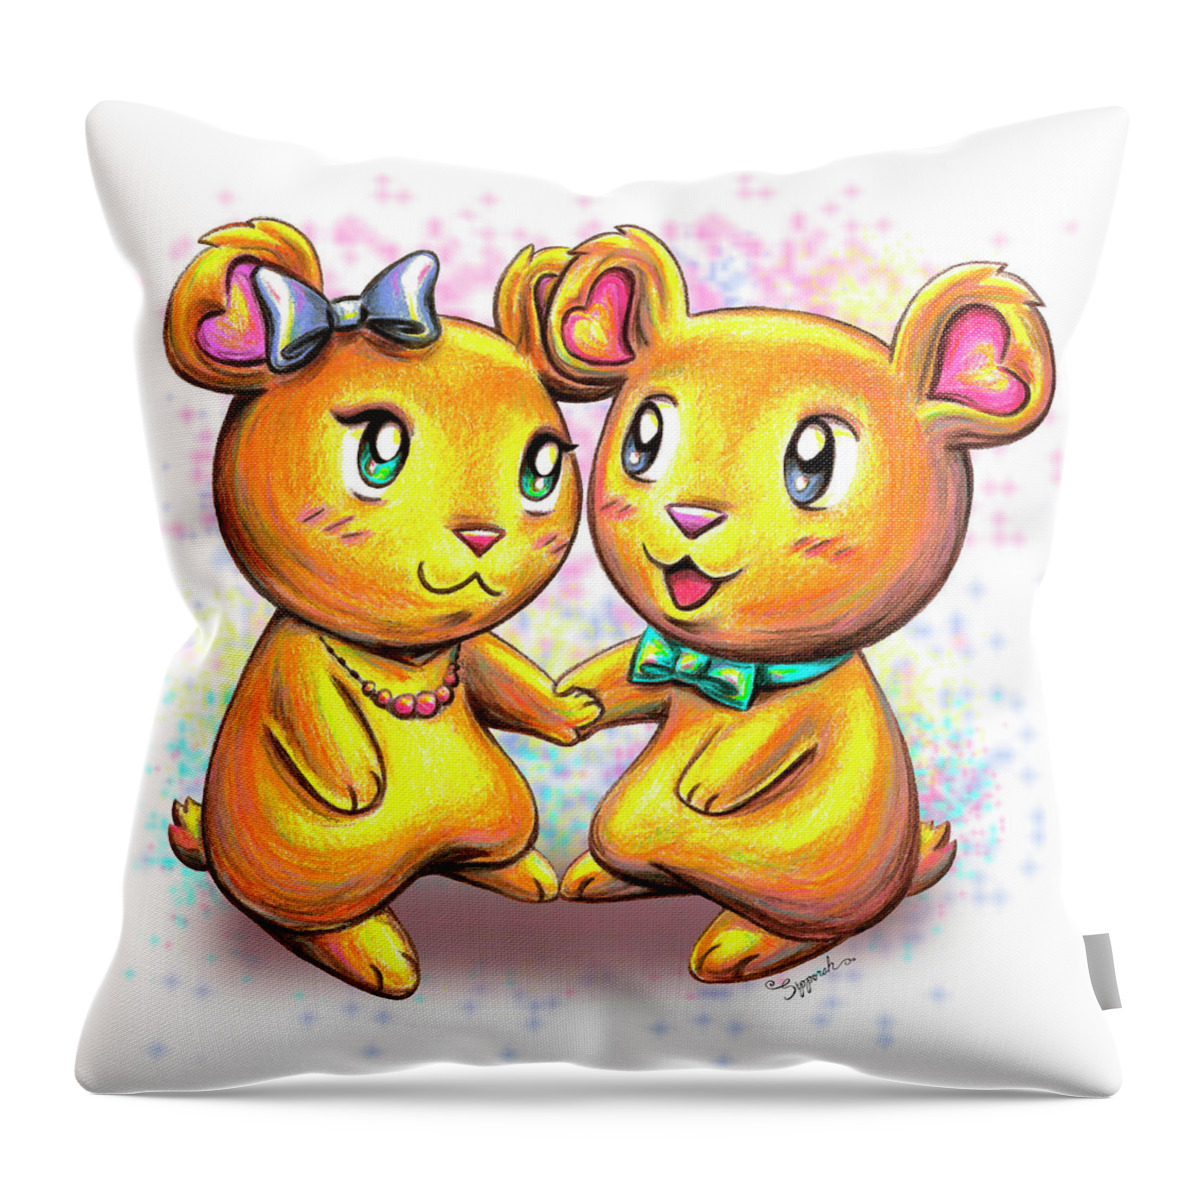 Bear Throw Pillow featuring the drawing Lovely Couple by Sipporah Art and Illustration